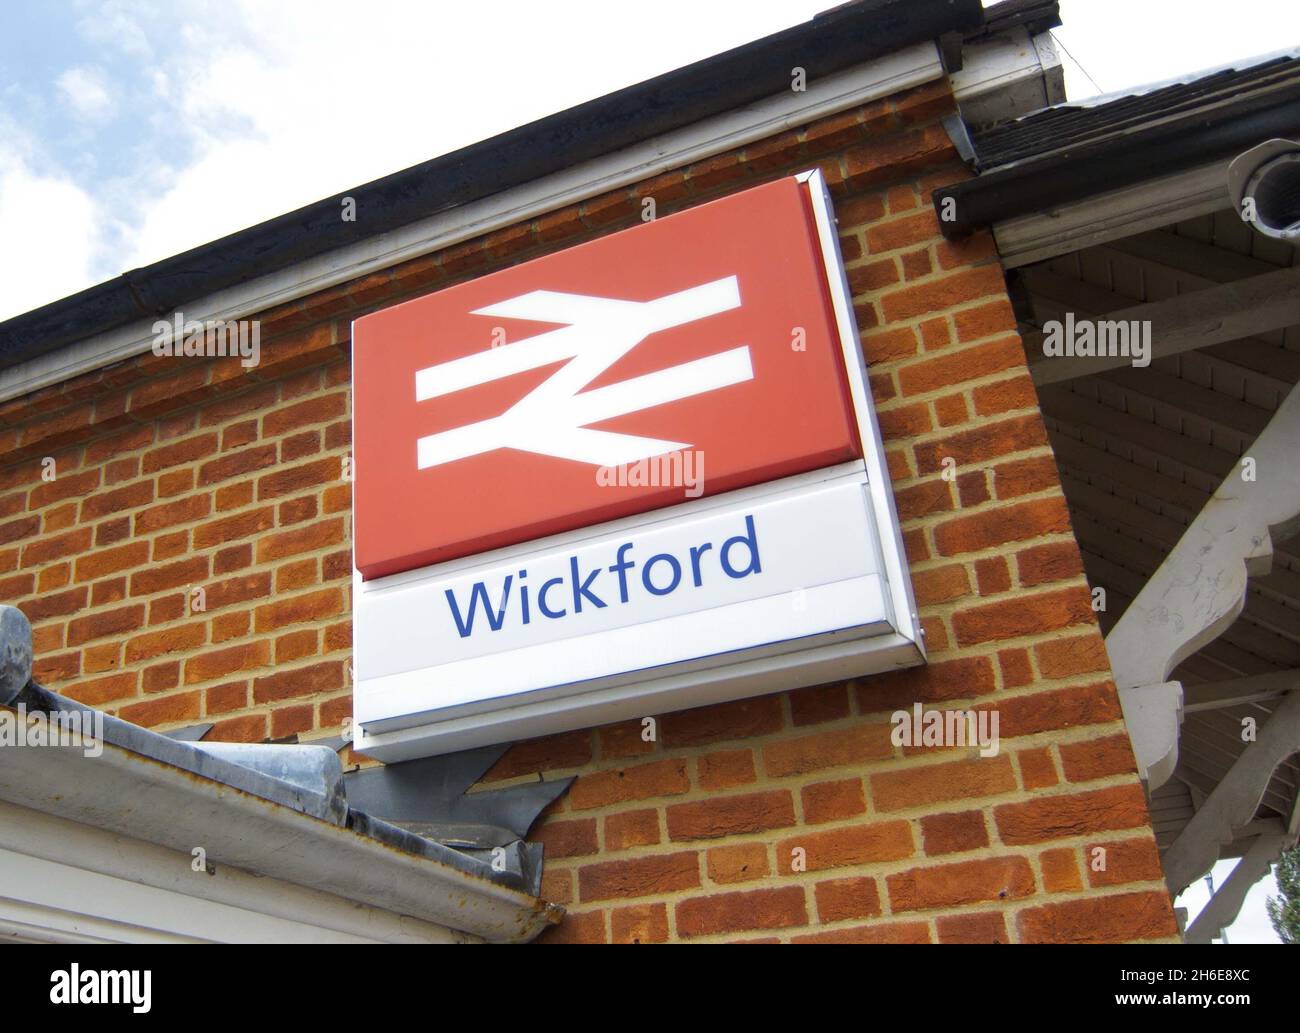 The suburban town of Wickford, in Essex, home to hacker Ryan Cleary. The British teenager is suspected of masterminding the global computer hacking group LulzSec from his bedroom and could face a fight against extradition to the US after being arrested by police. Stock Photo